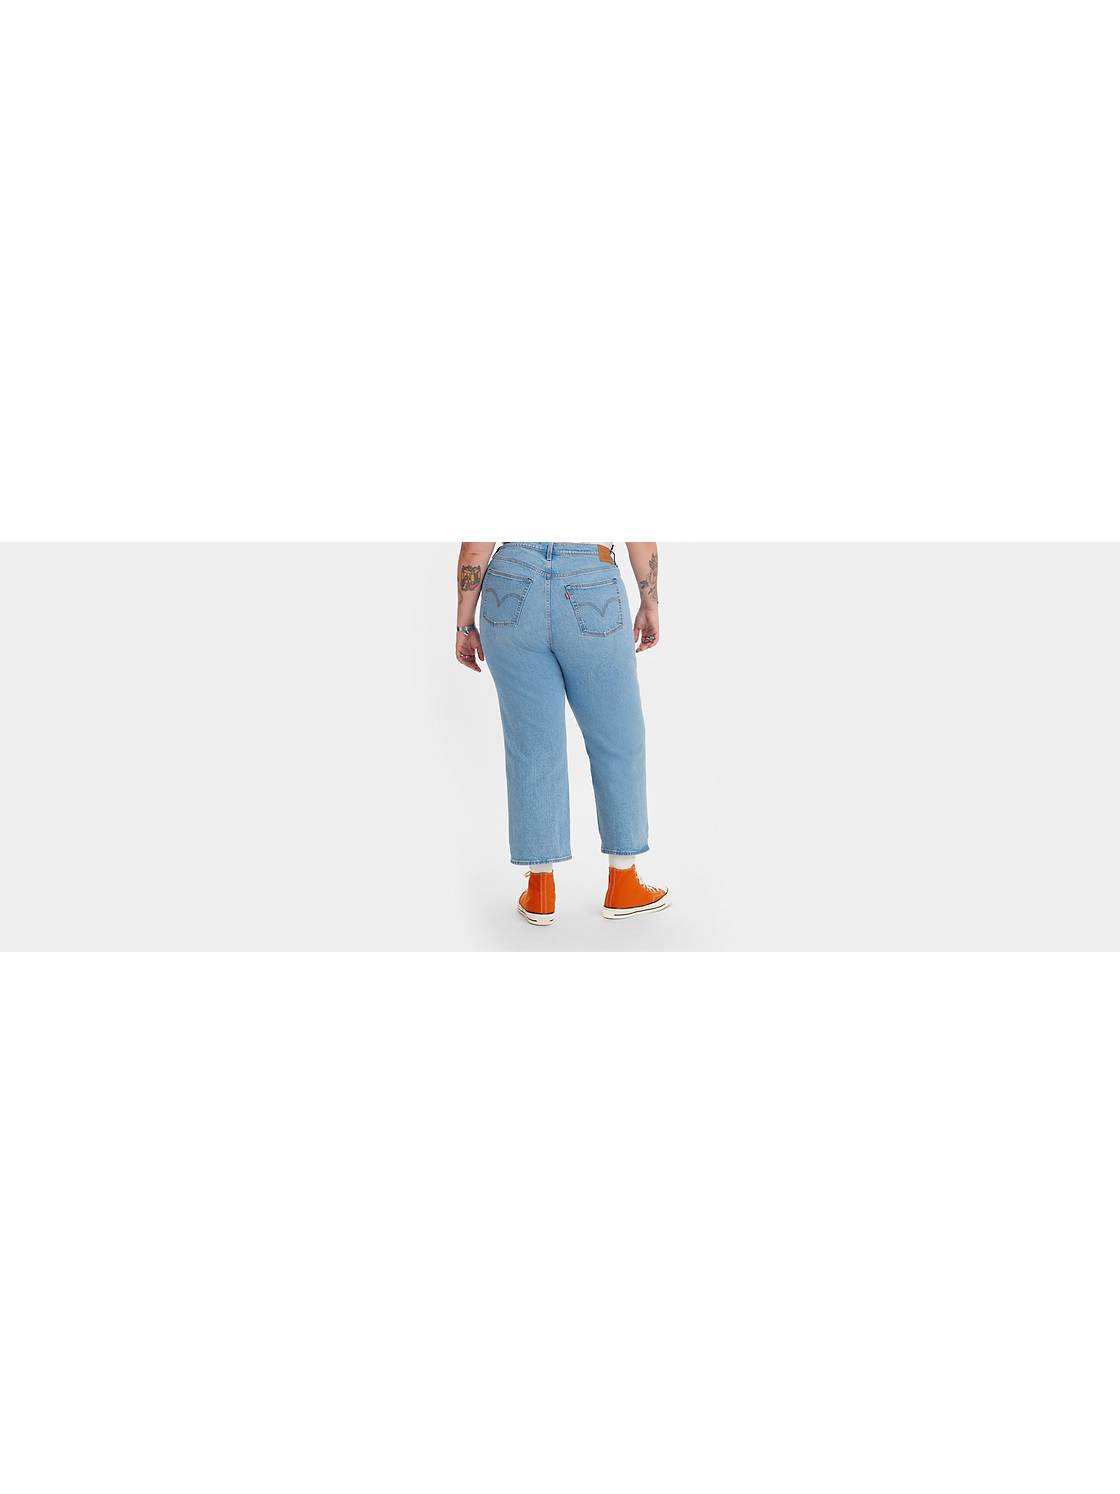 Women's Button Fly Jeans - Shop 501® Button Fly Jeans